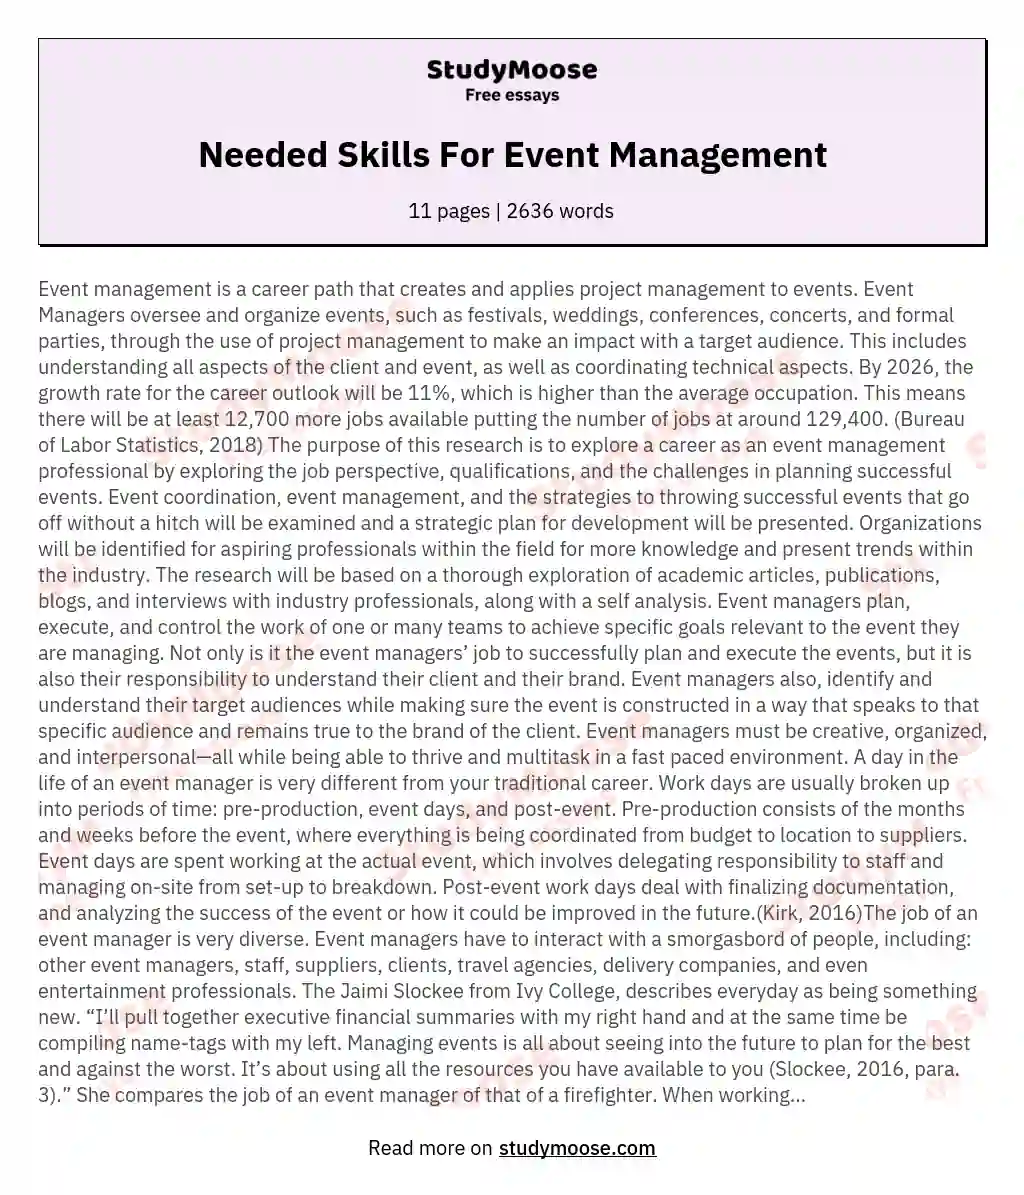 Needed Skills For Event Management